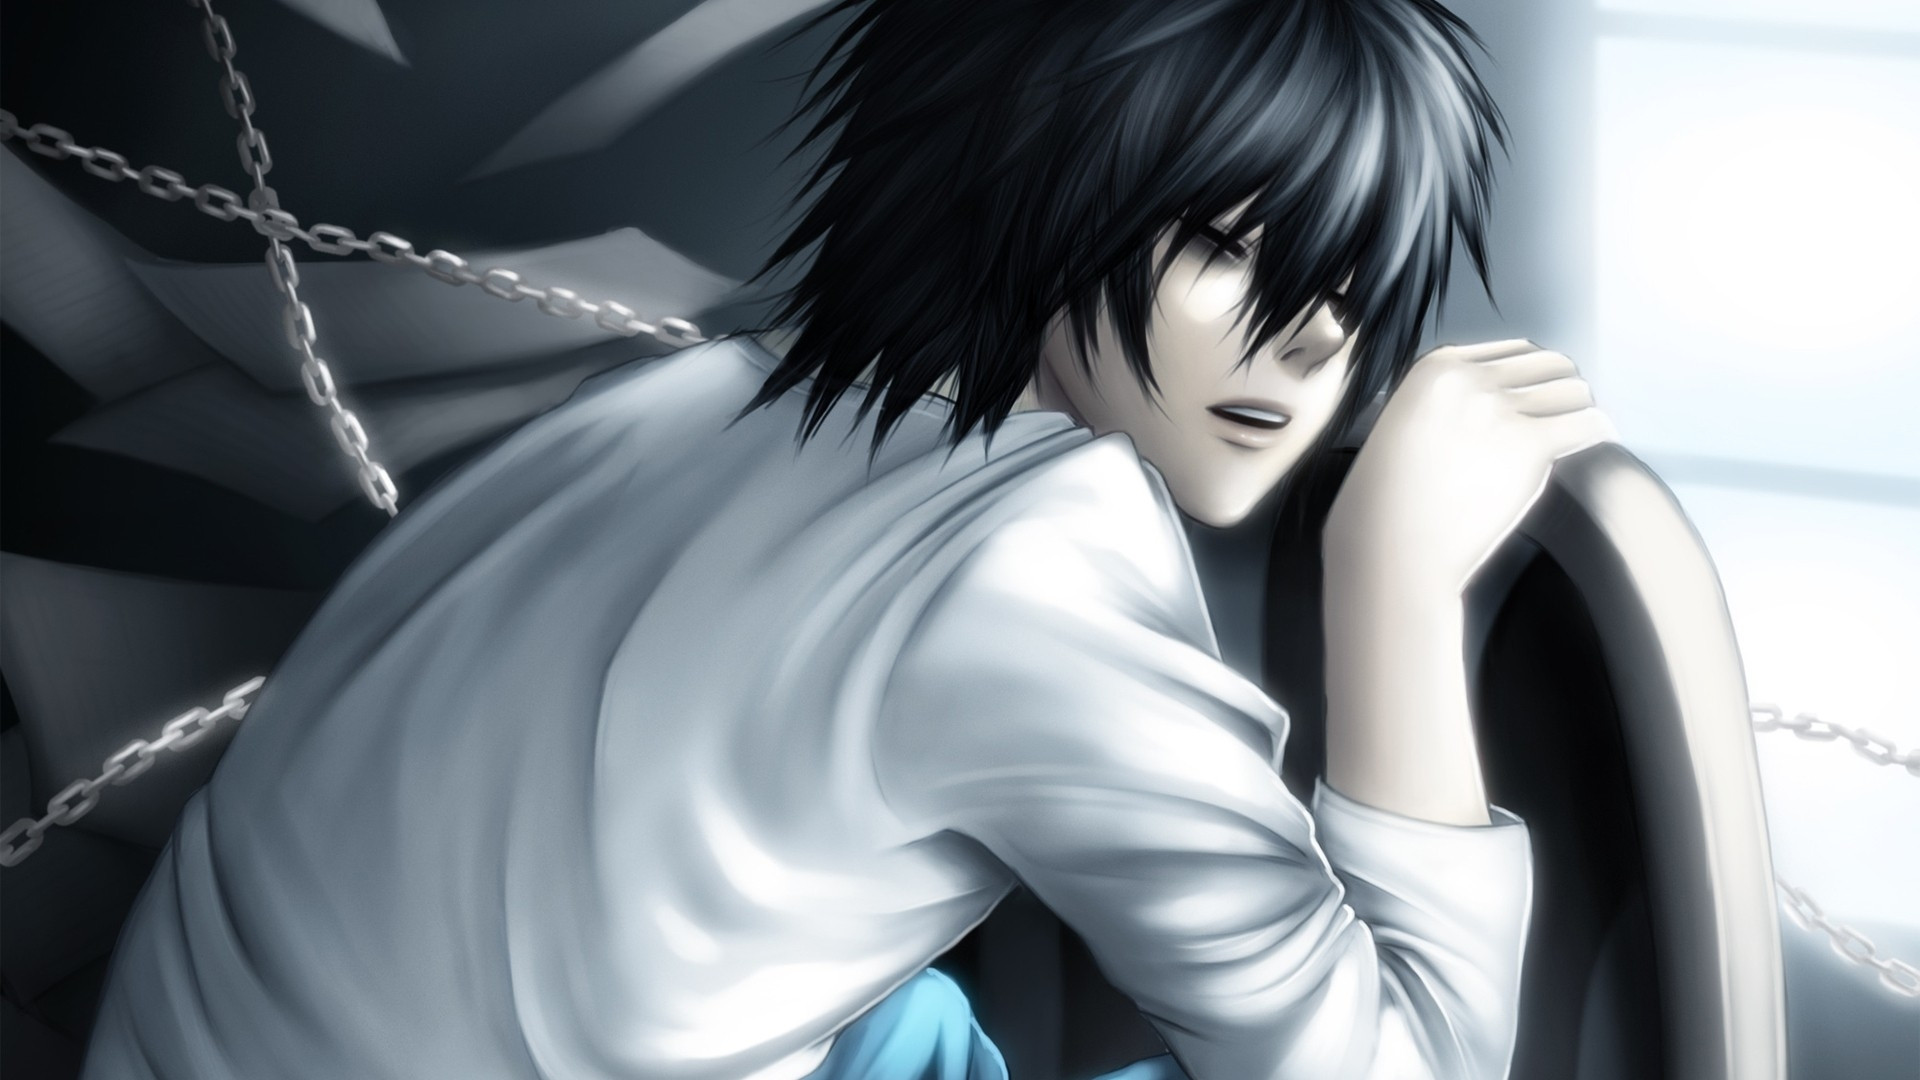 80+ L (Death Note) HD Wallpapers and Backgrounds